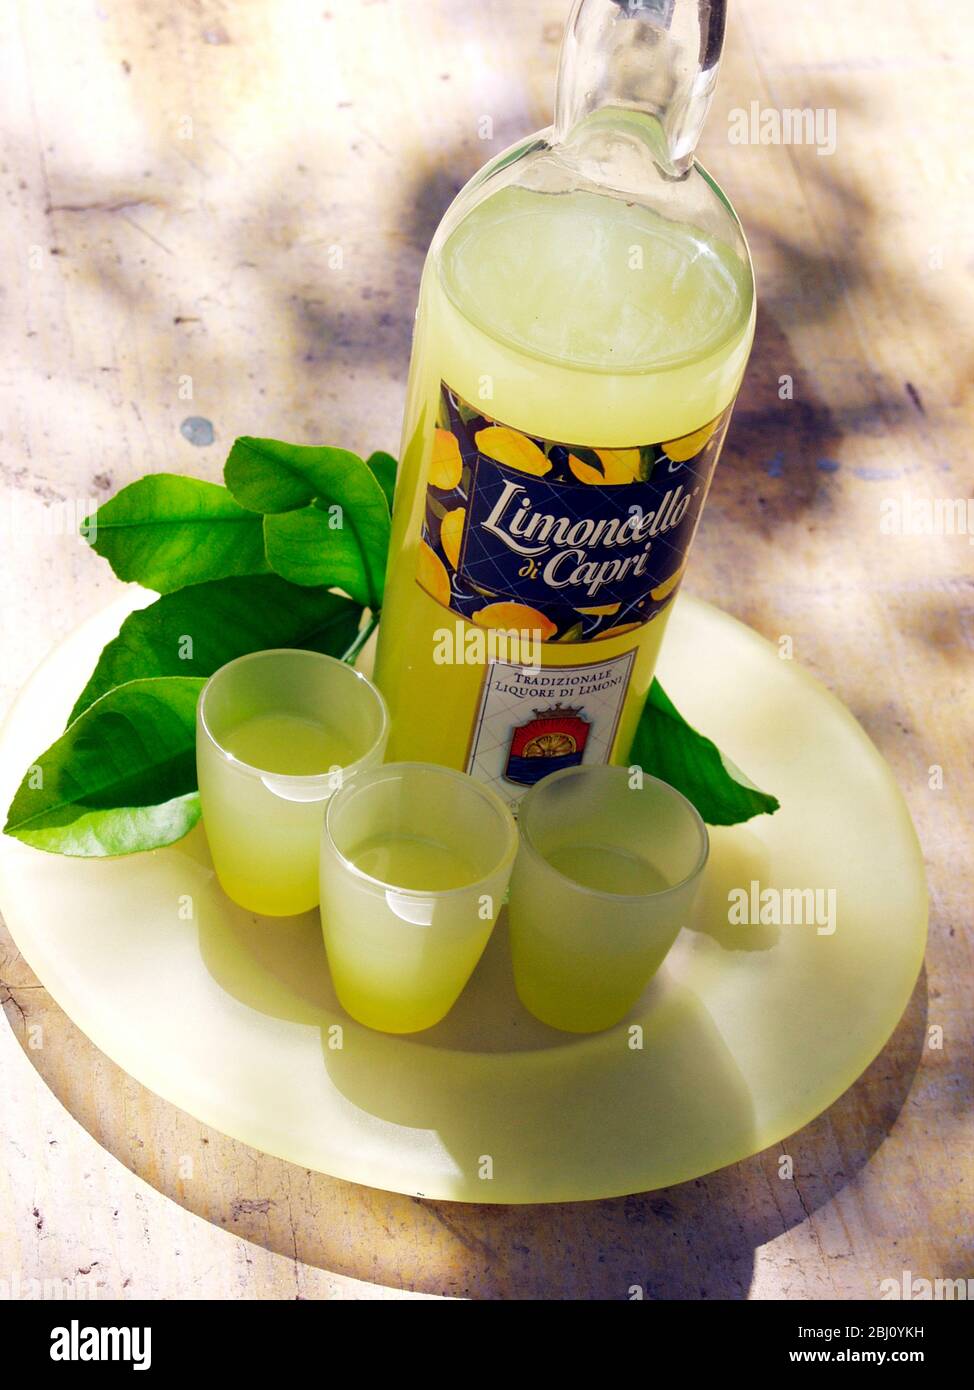 Bottle of limoncello liqueur with three glasses - Stock Photo